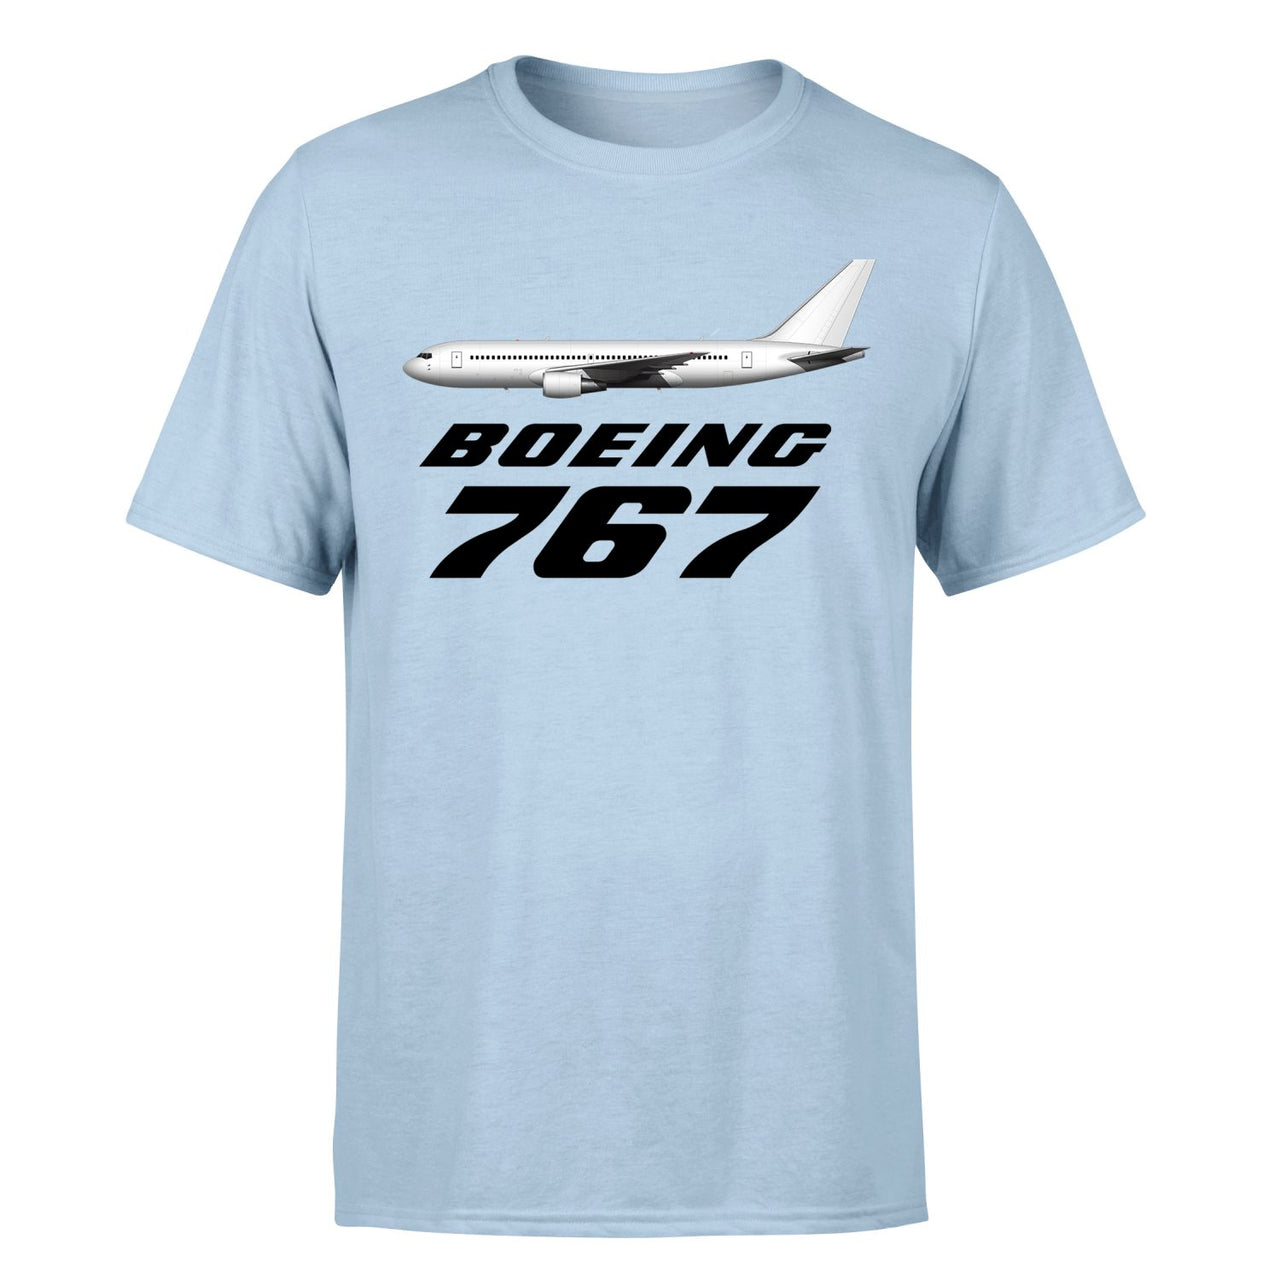 The Boeing 767 Designed T-Shirts